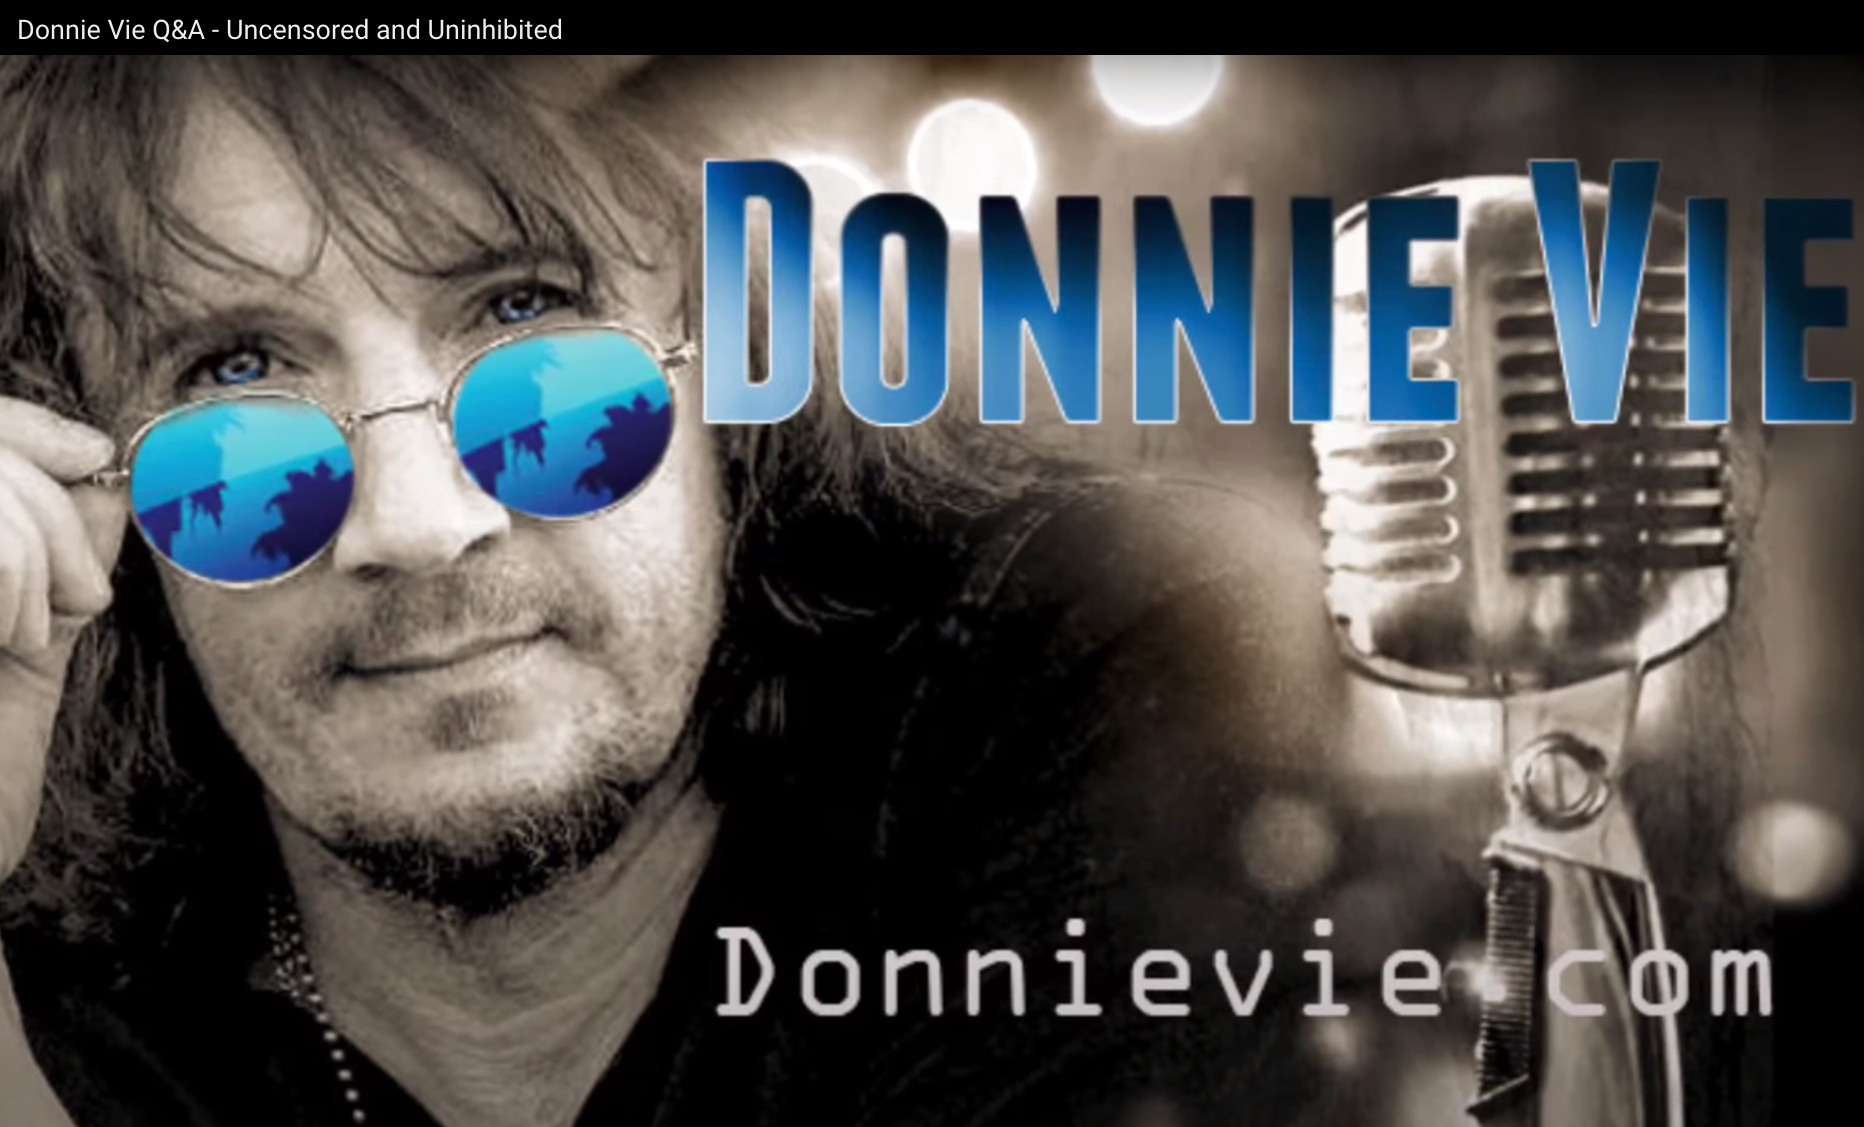 Donnie Vie Q&A - Uncensored and Uninhibited